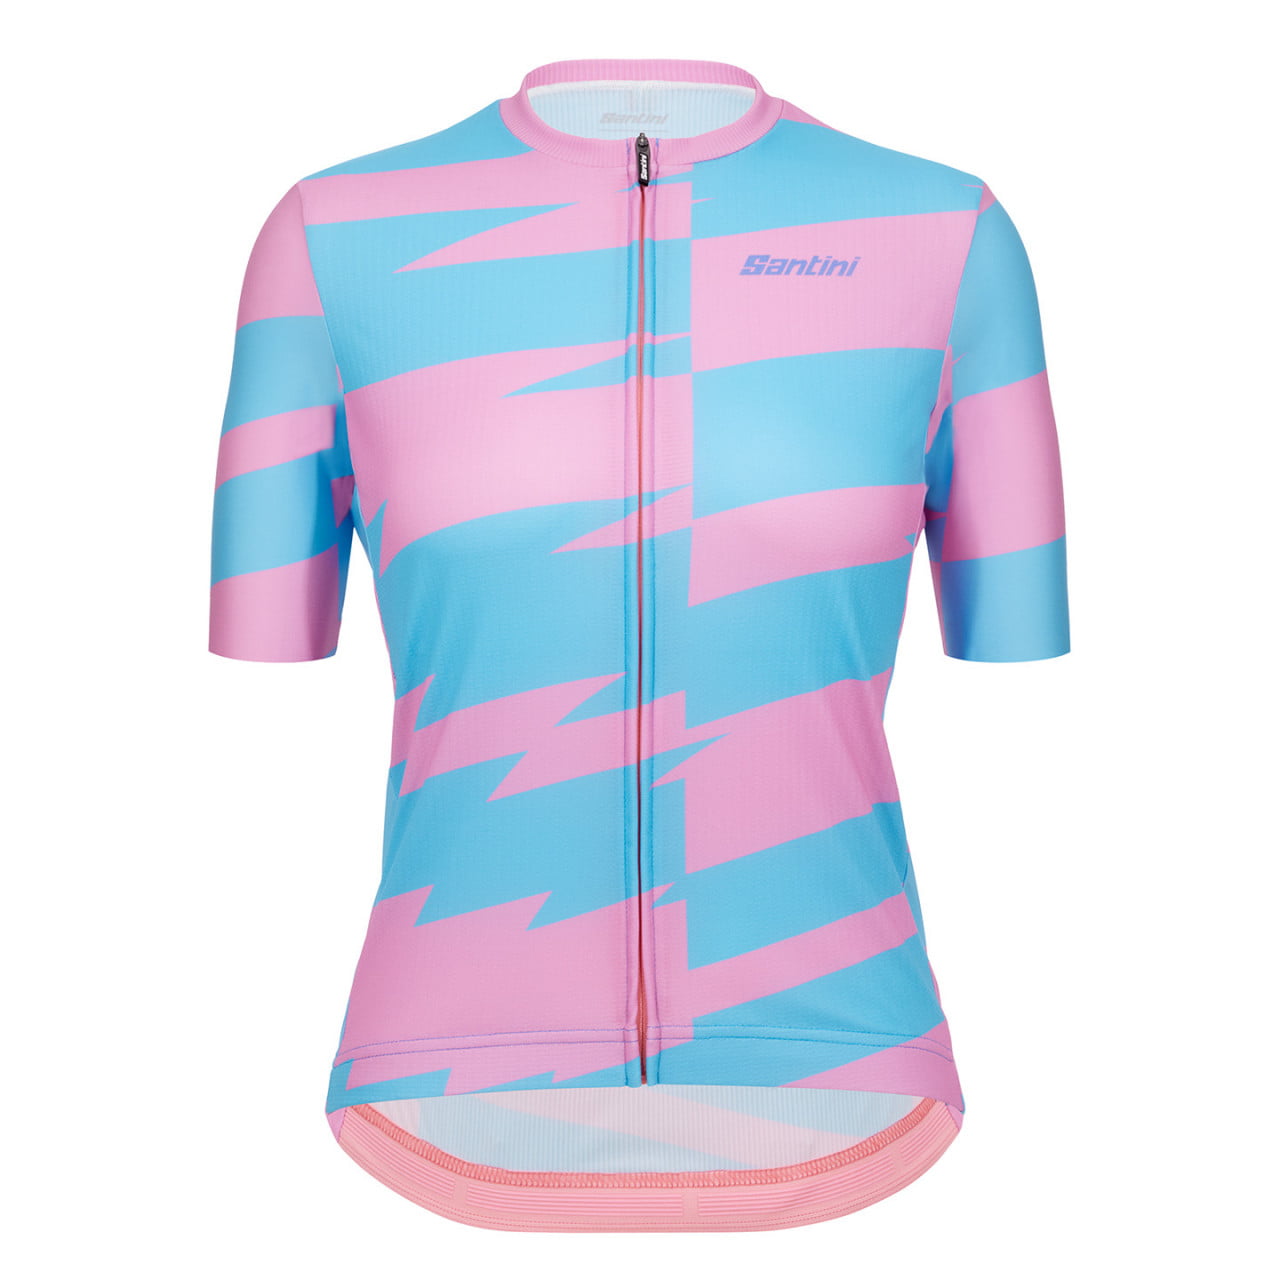 Maillot manches courtes femme Furia Smart